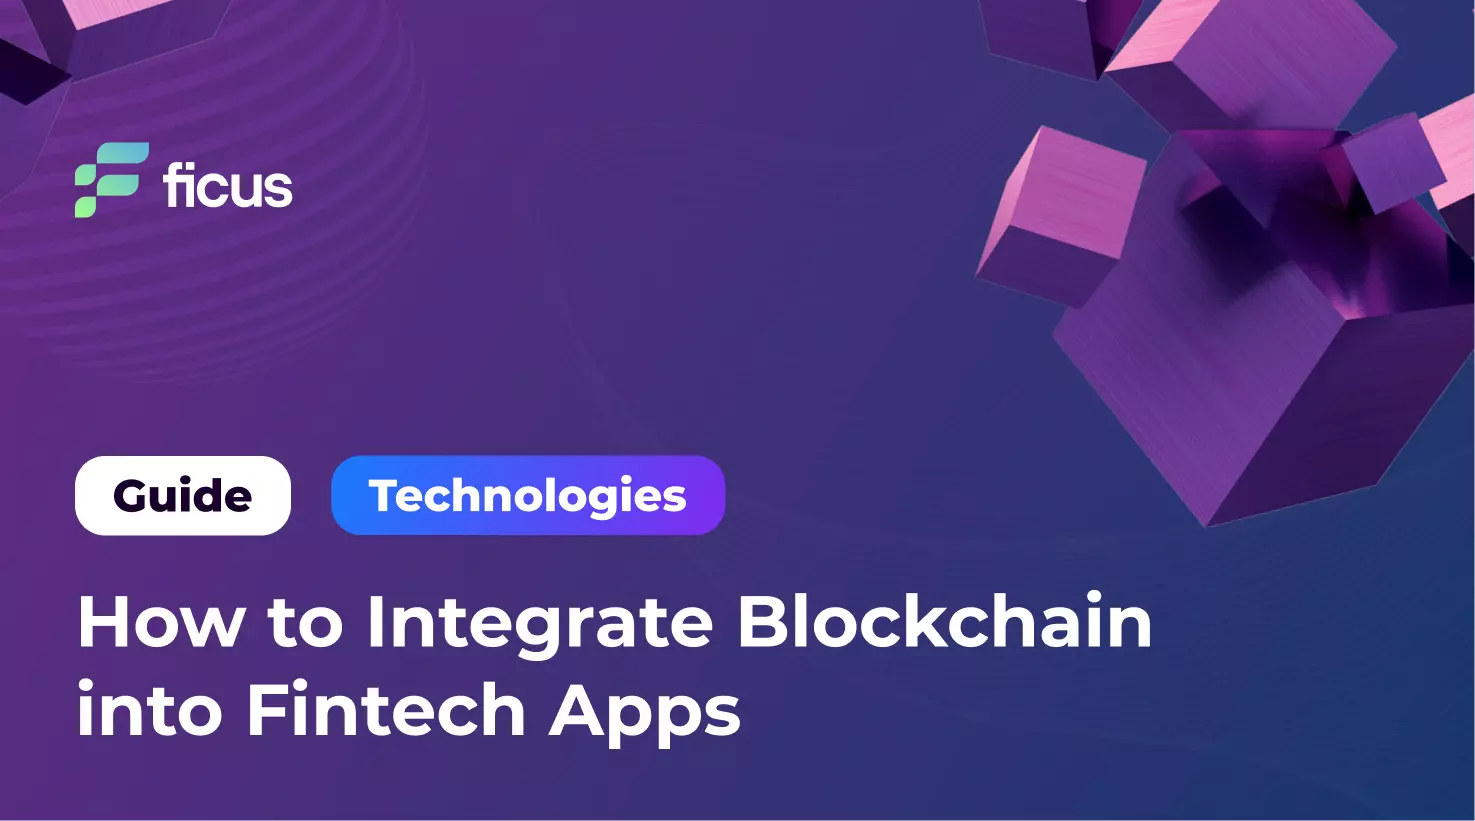 1_How to Integrate Blockchain into Fintech Apps